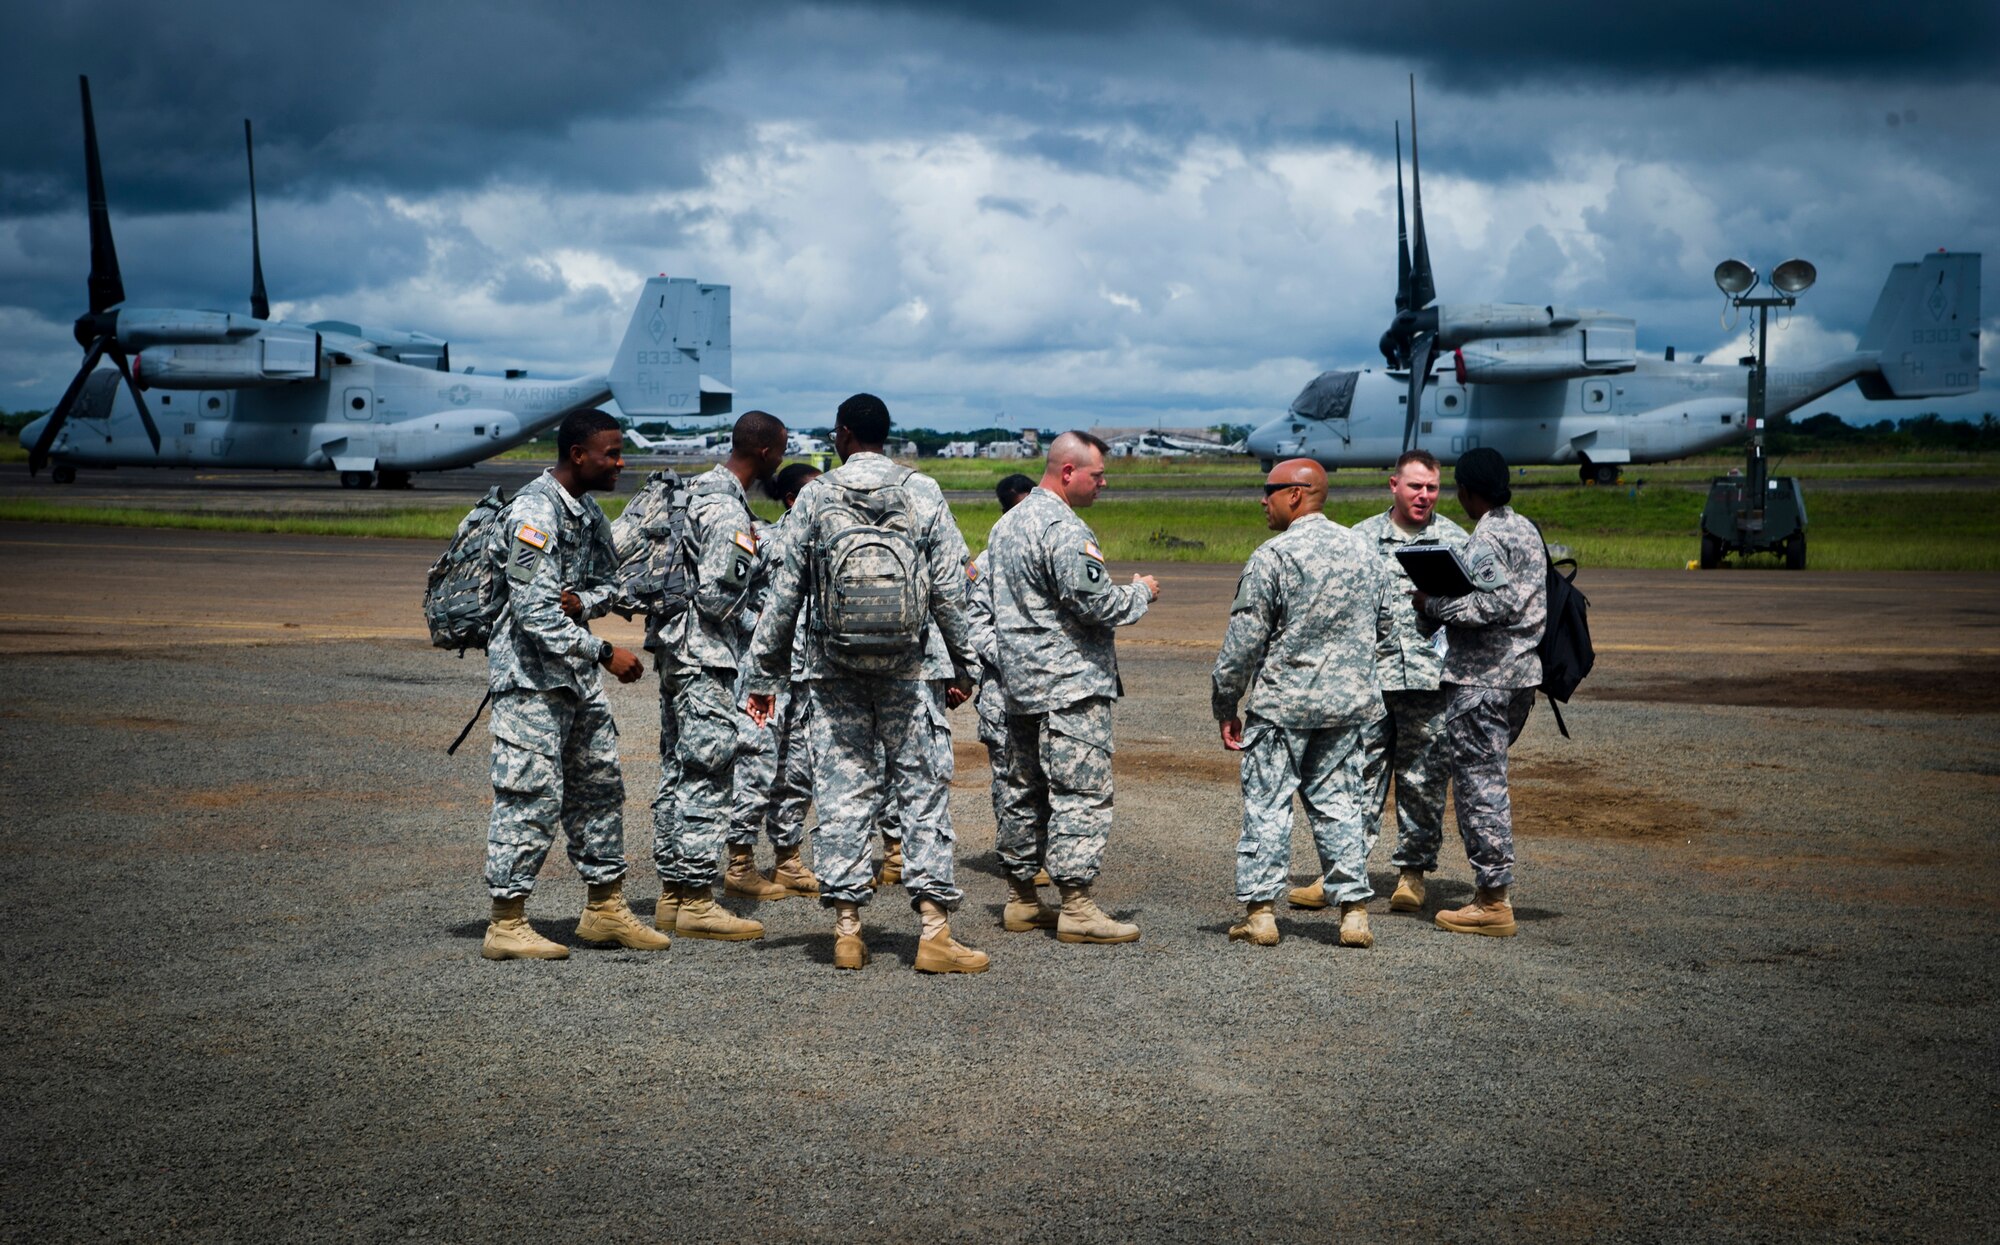 ROBERTS INTERNATIONAL AIRPORT, Republic of Liberia - U.S. Army Soldiers of the 688th Rapid Port Opening Element assigned to Joint Base Langley-Eustis, Va., and part of the Joint Task Force-Port Opening team, discuss the day's events during Operation UNITED ASSISTANCE here, October 15, 2014. The 688 RPOE is working in support of the USAID-led interagency team and the international community to provide effective and efficient delivery of assistance to the Government of Liberia to end the EVD outbreak. (U.S. Air Force photo/Staff Sgt. Gustavo Gonzalez/RELEASED)